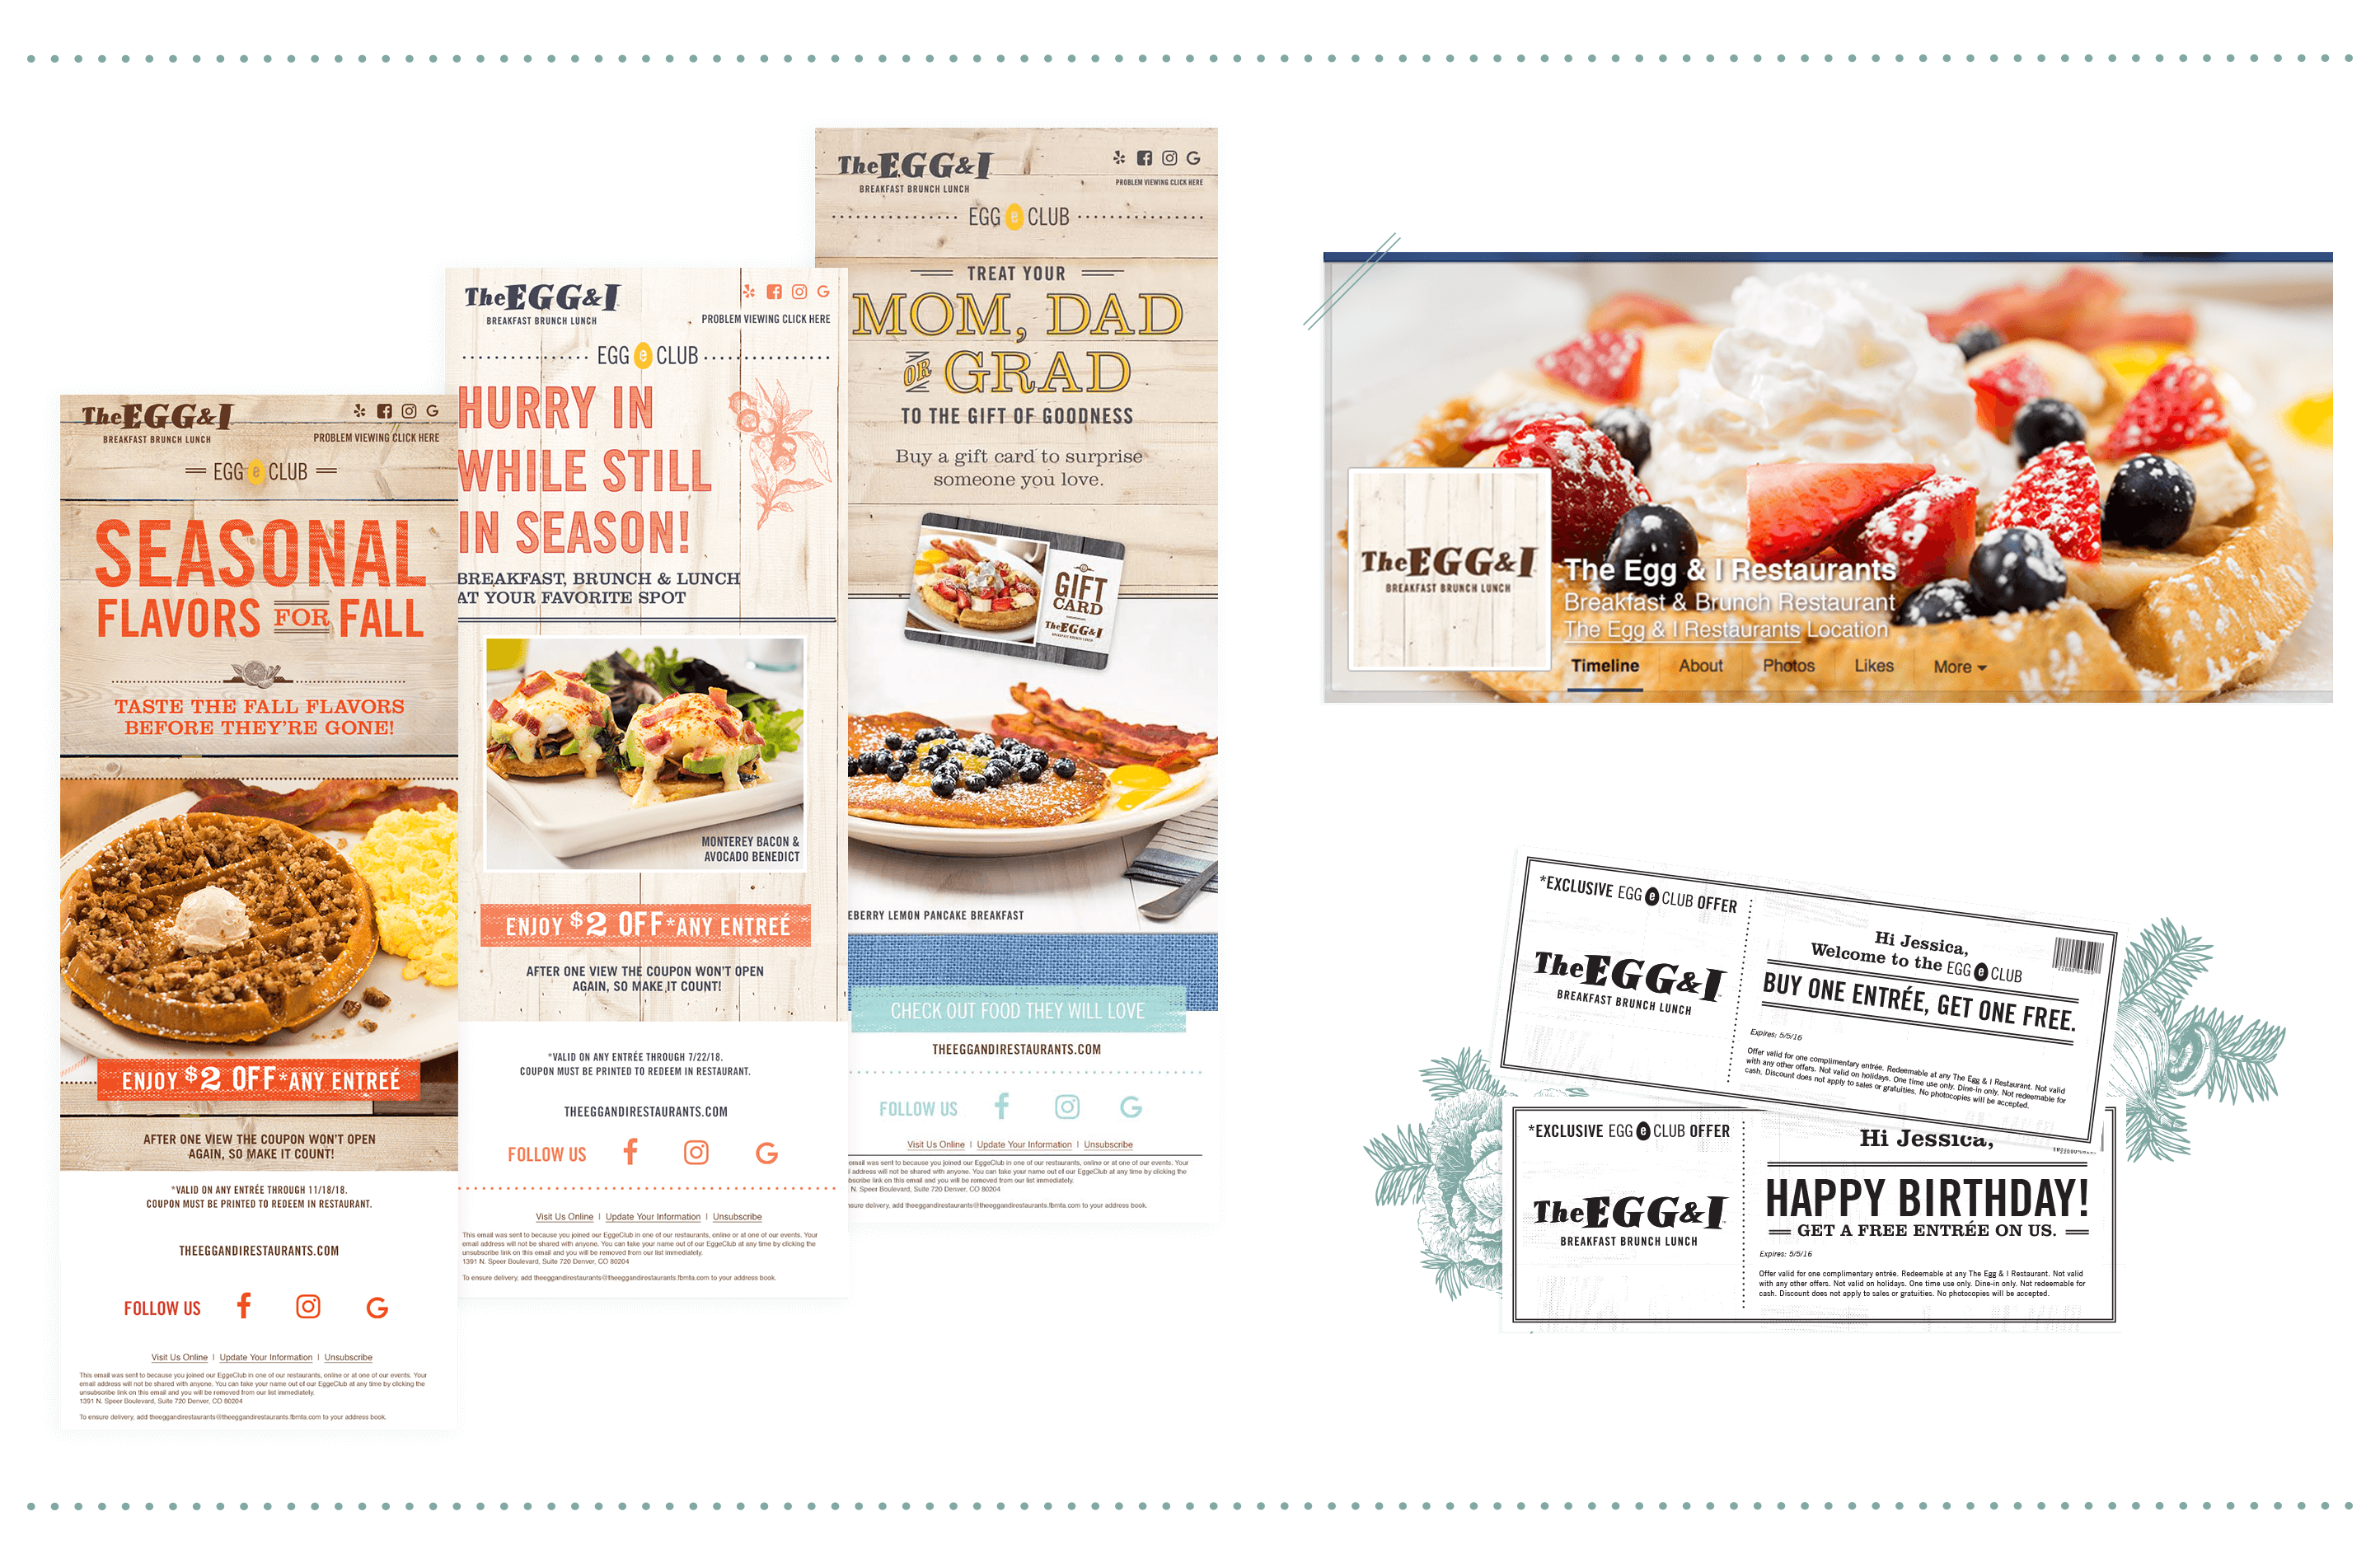 Digital design and campaign for the Egg & I Restaurants including emails and socials and specials